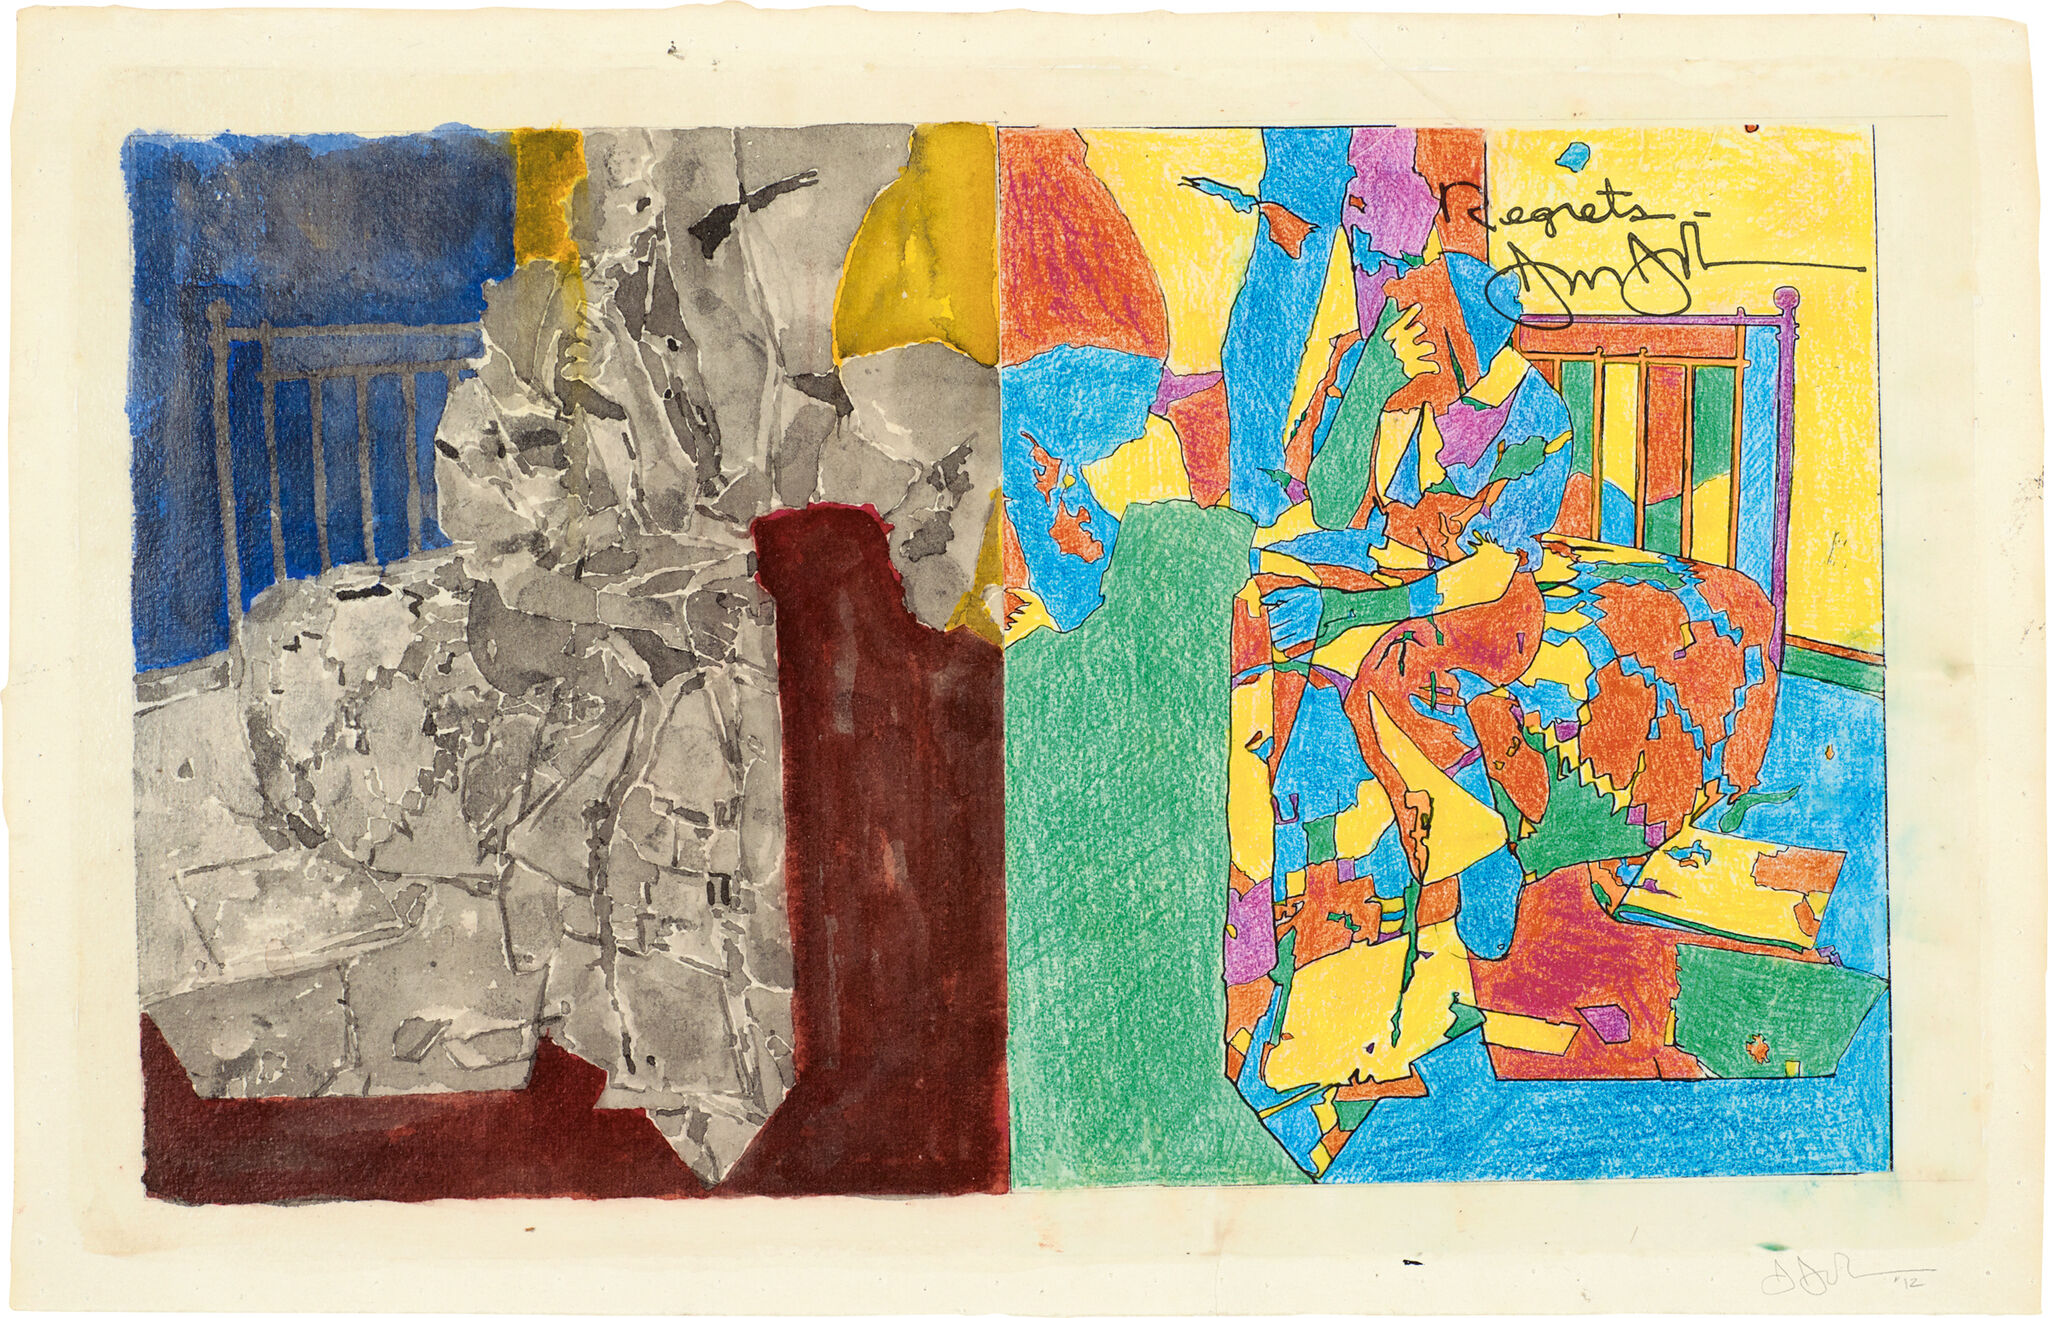 Wide rectangular composition vertically bisected into two equal halves. The right half is a colorful contour drawing of a figure sitting upright in bed, while the left half mirrors this image but without the linear outlines and rendered in shades of gray, as well as muted red,  blue, and yellow.